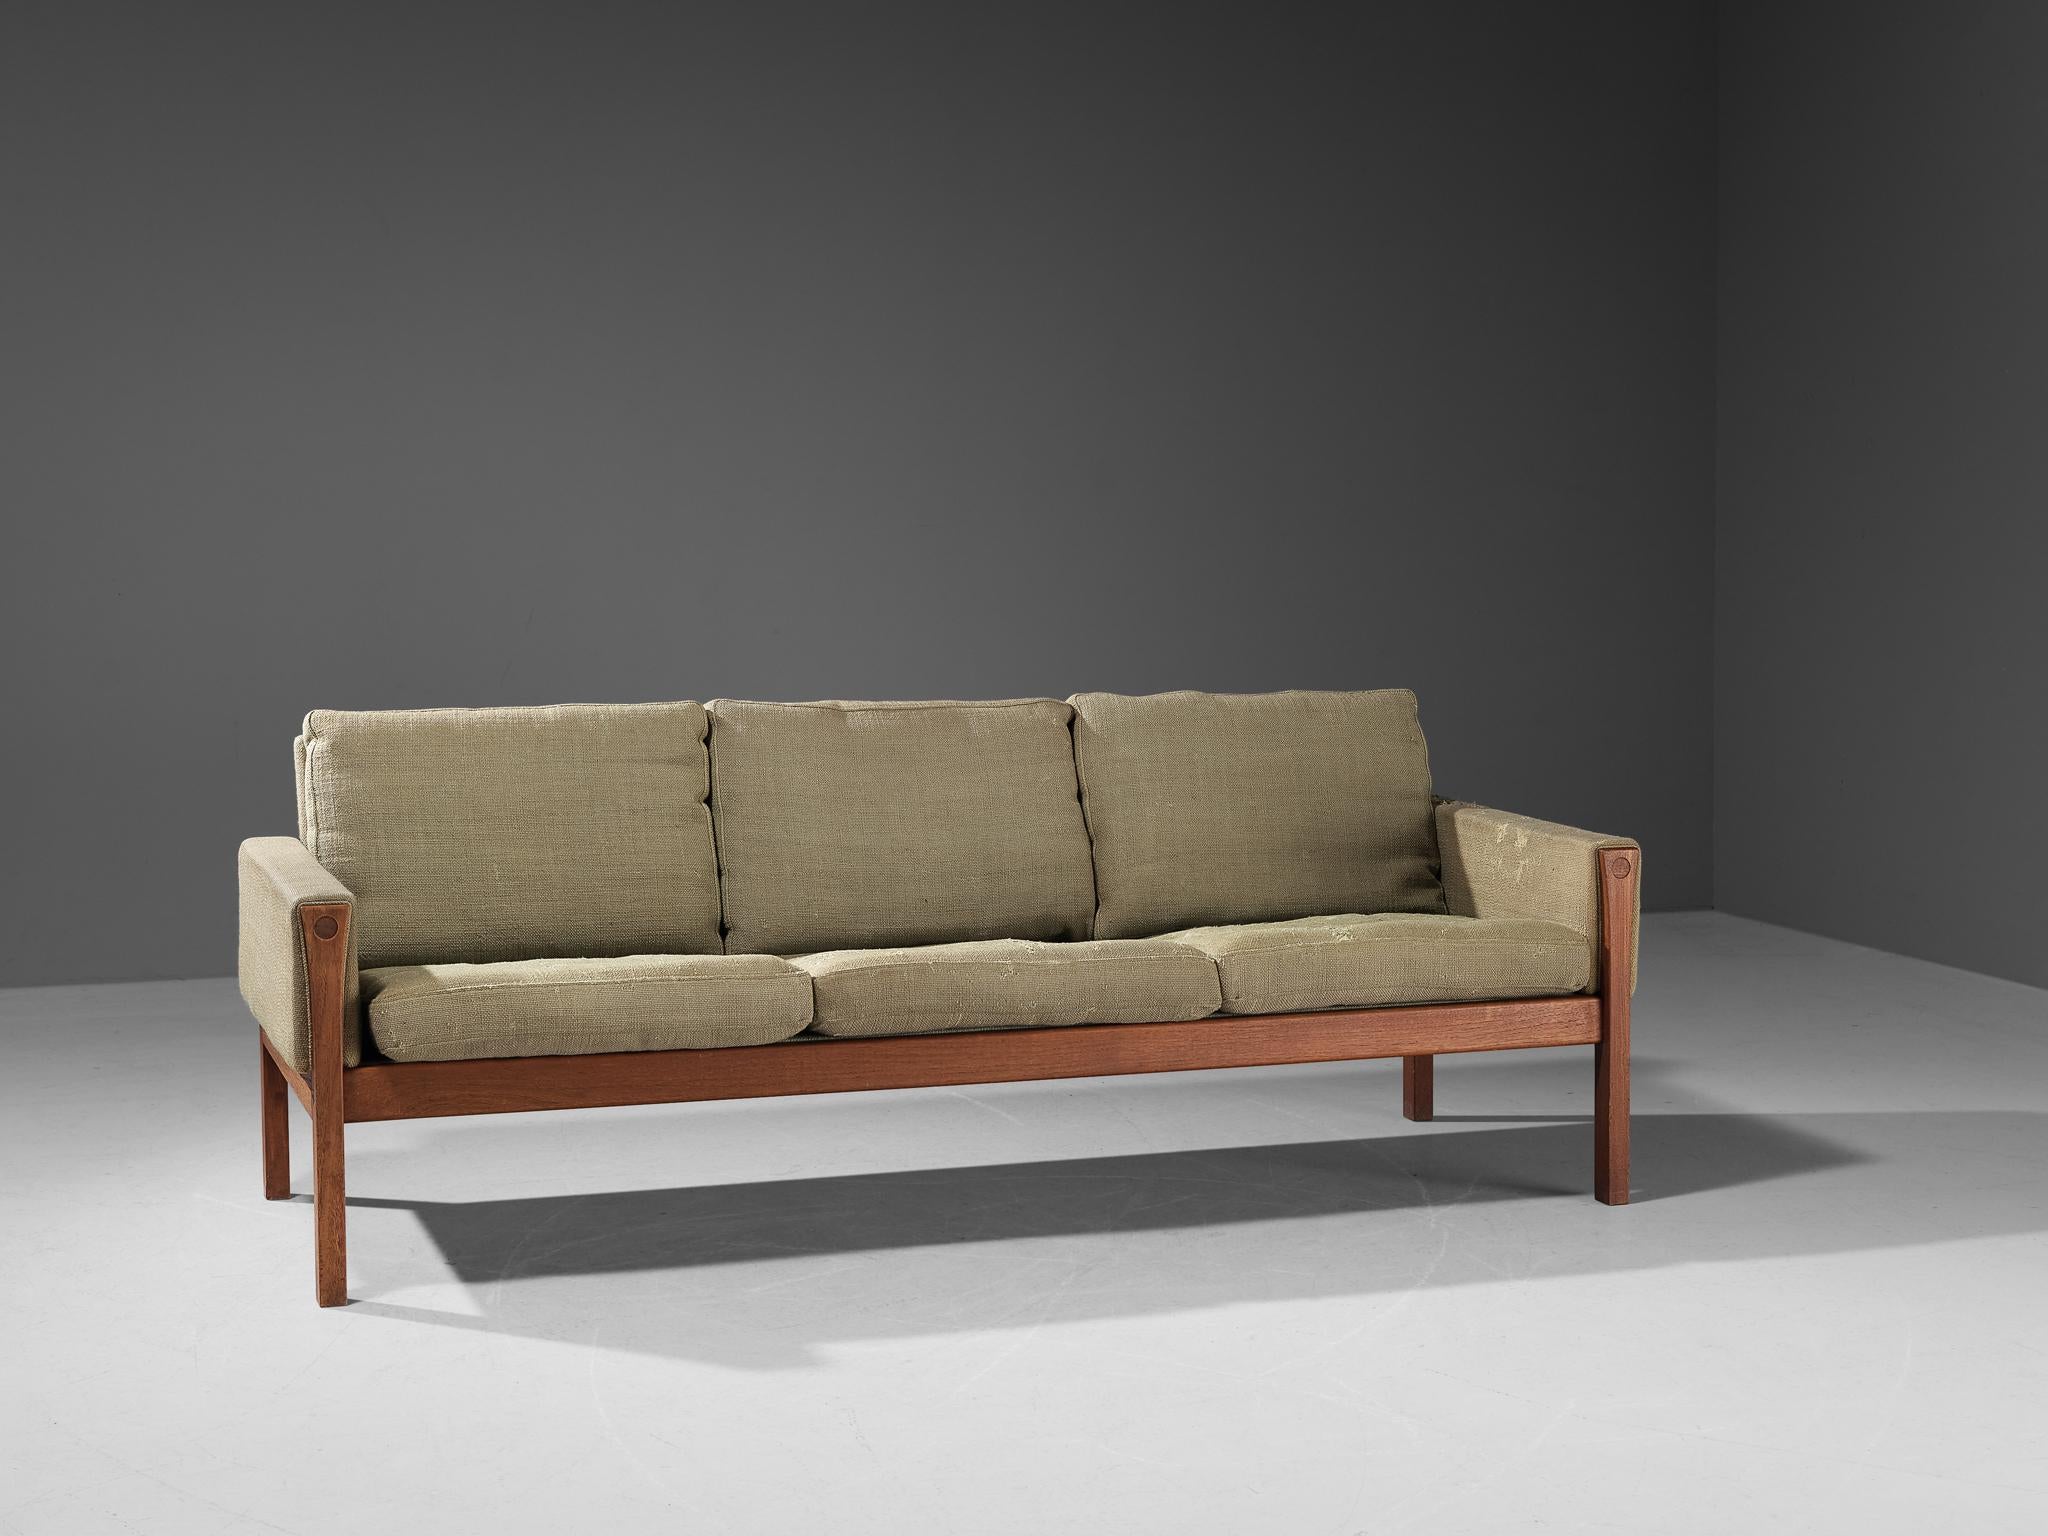 Hans J. Wegner for AP Stolen sofa, model 'AP 62/3', grey fabric, teak, Denmark, circa 1960

This streamlined sofa is characterized by a simplistic, natural and timeless aesthetics. The design features a solid construction of clear lines and